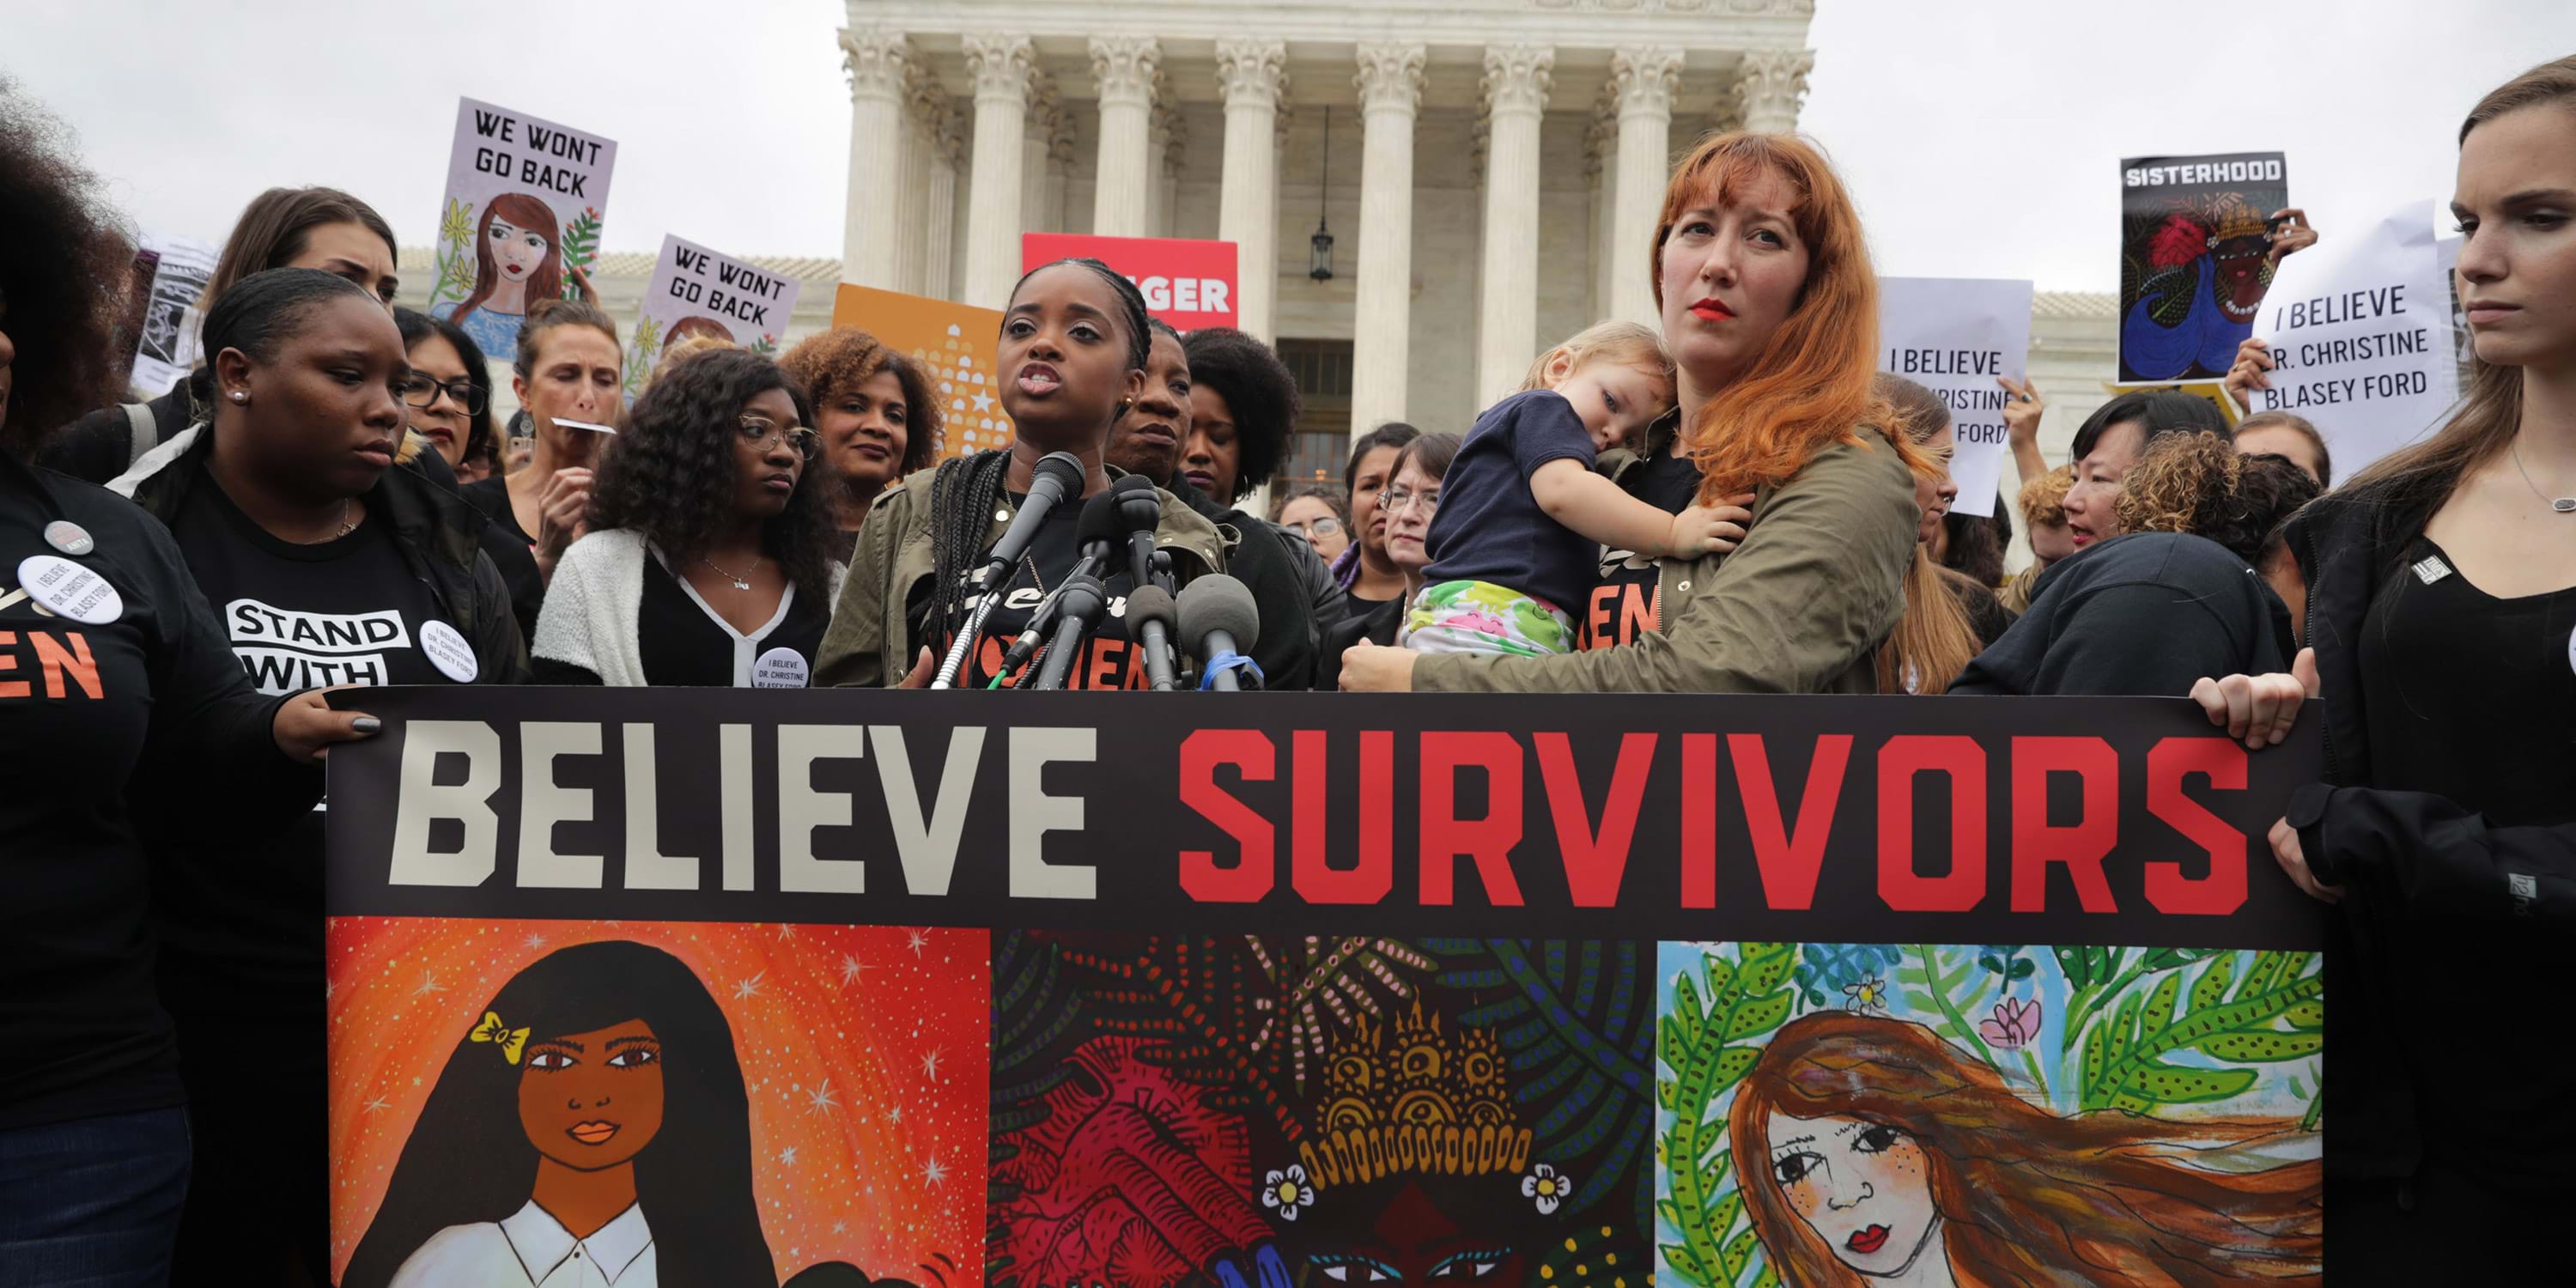 A crowd of women stands behind a banner that reads "Believe Survivors". A Black woman speaks at a podium with an assortment of mics.  A white woman with red hair holding a small child stands next to the podium. 